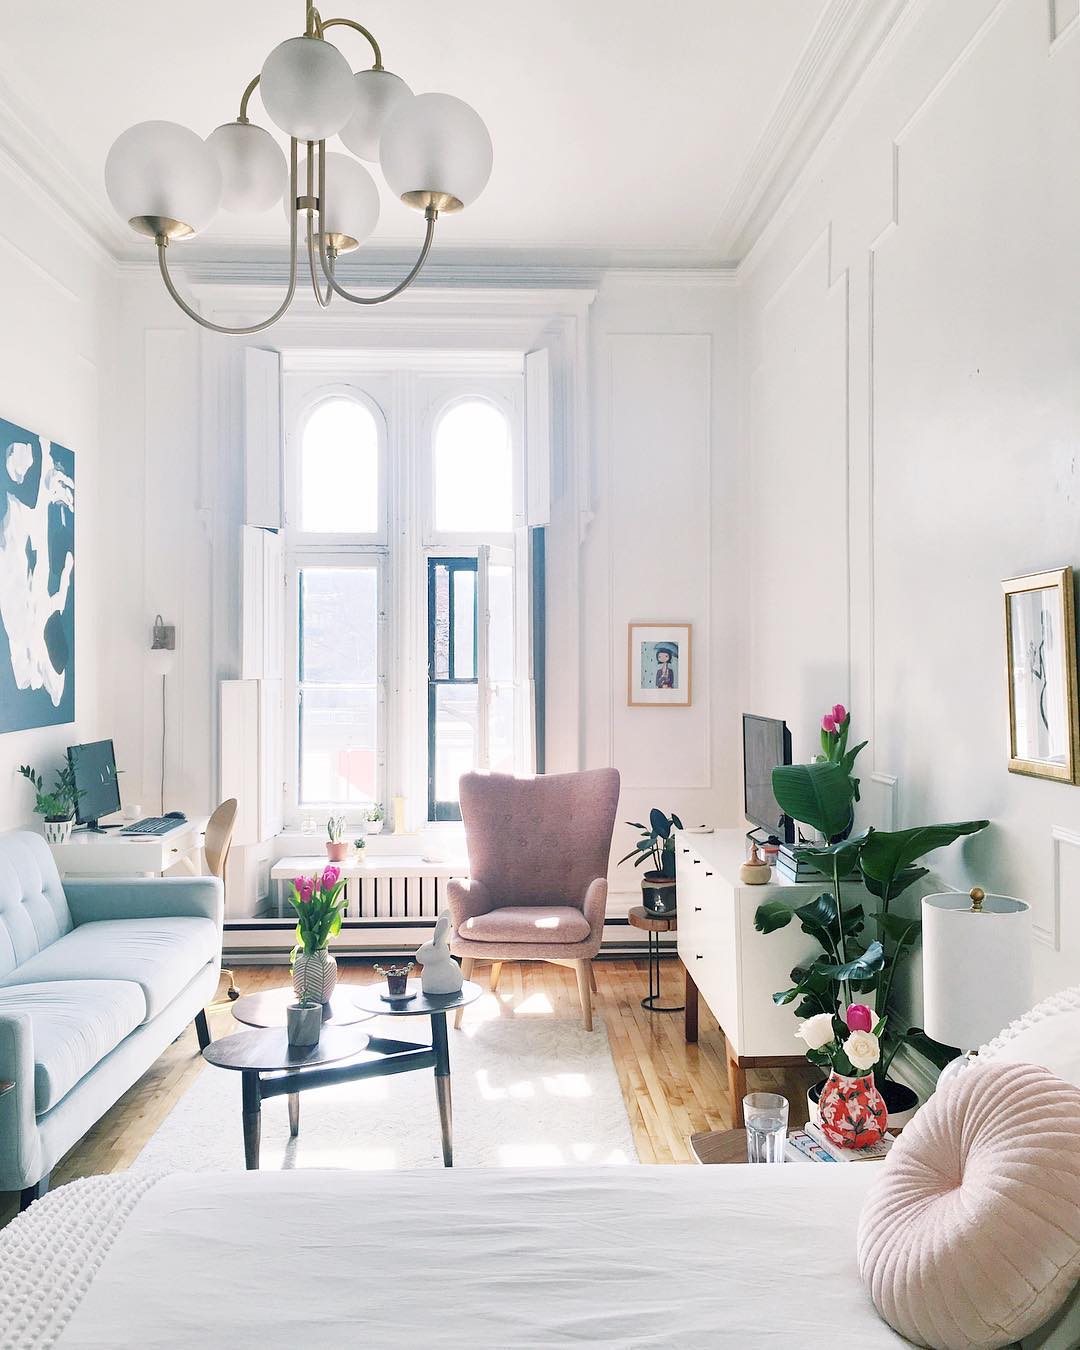 The Studio Apartment Divide: How to Create Zones for Better Living